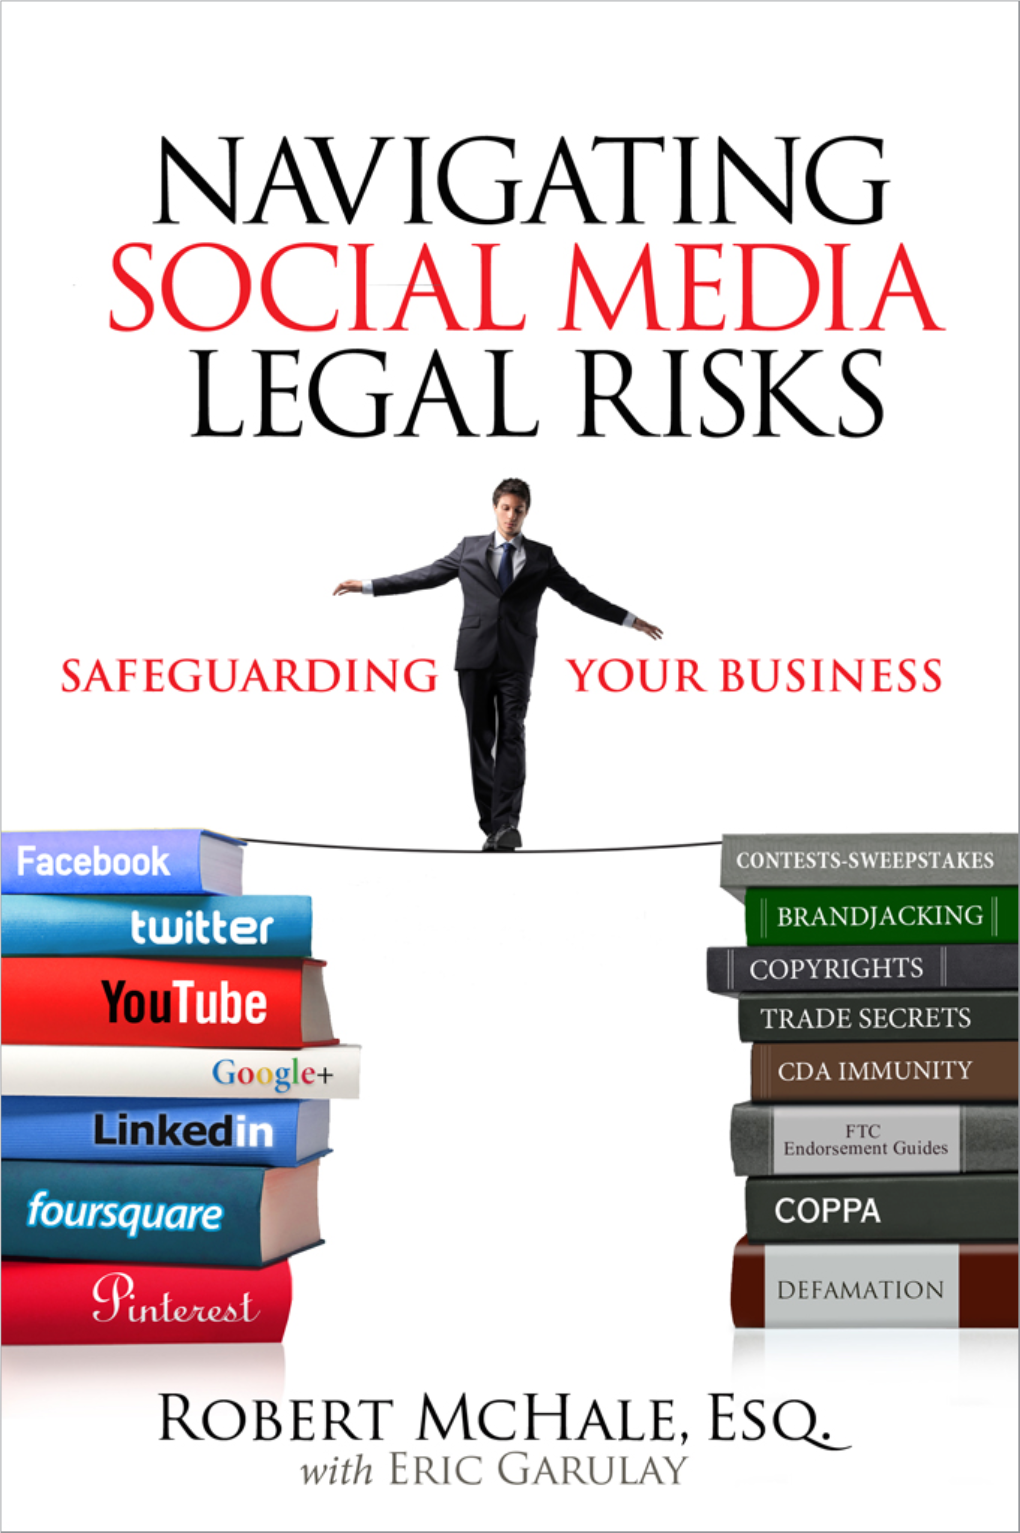 Navigating Social Media Legal Risks: Editor-In-Chief Safeguarding Your Business Greg Wiegand Copyright © 2012 by Pearson Education, Inc